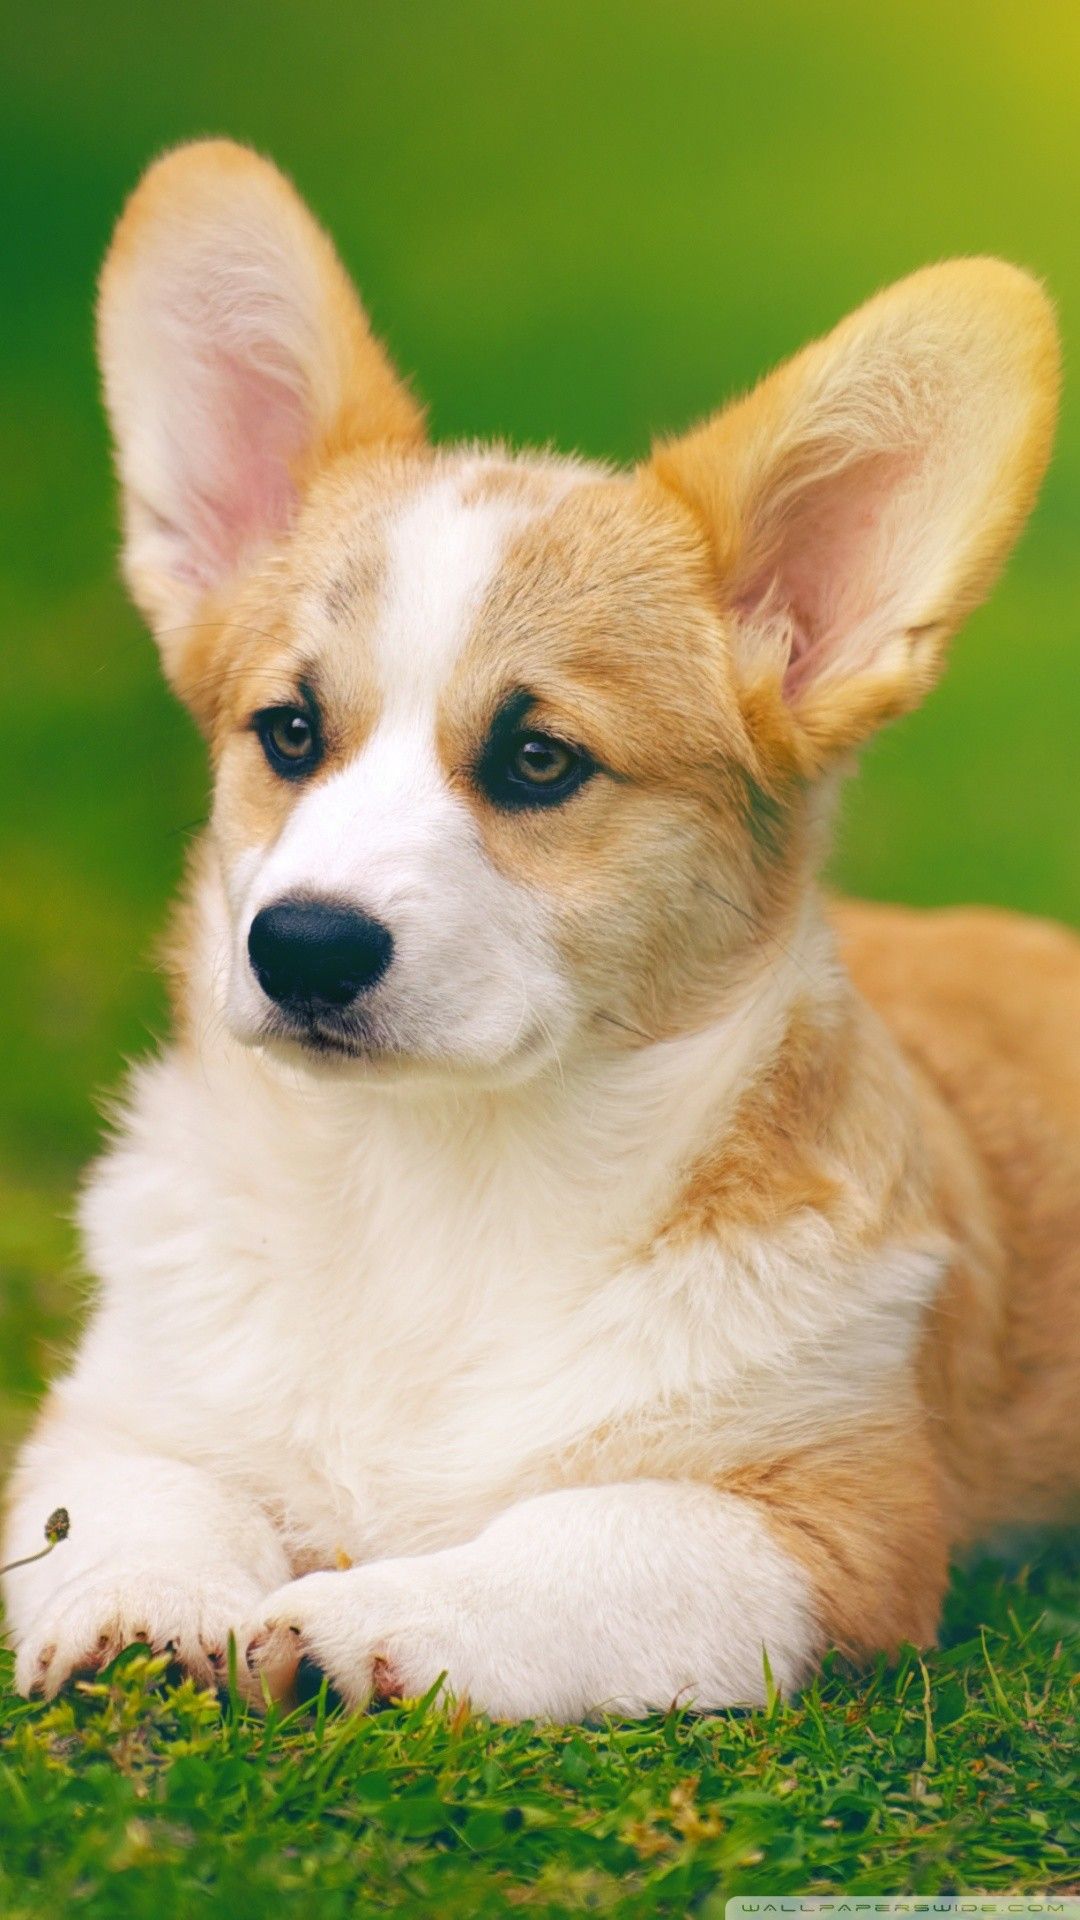 Corgi Patterned Wallpaper  Valencias Kofi Shop  Kofi  Where creators  get support from fans through donations memberships shop sales and more  The original Buy Me a Coffee Page